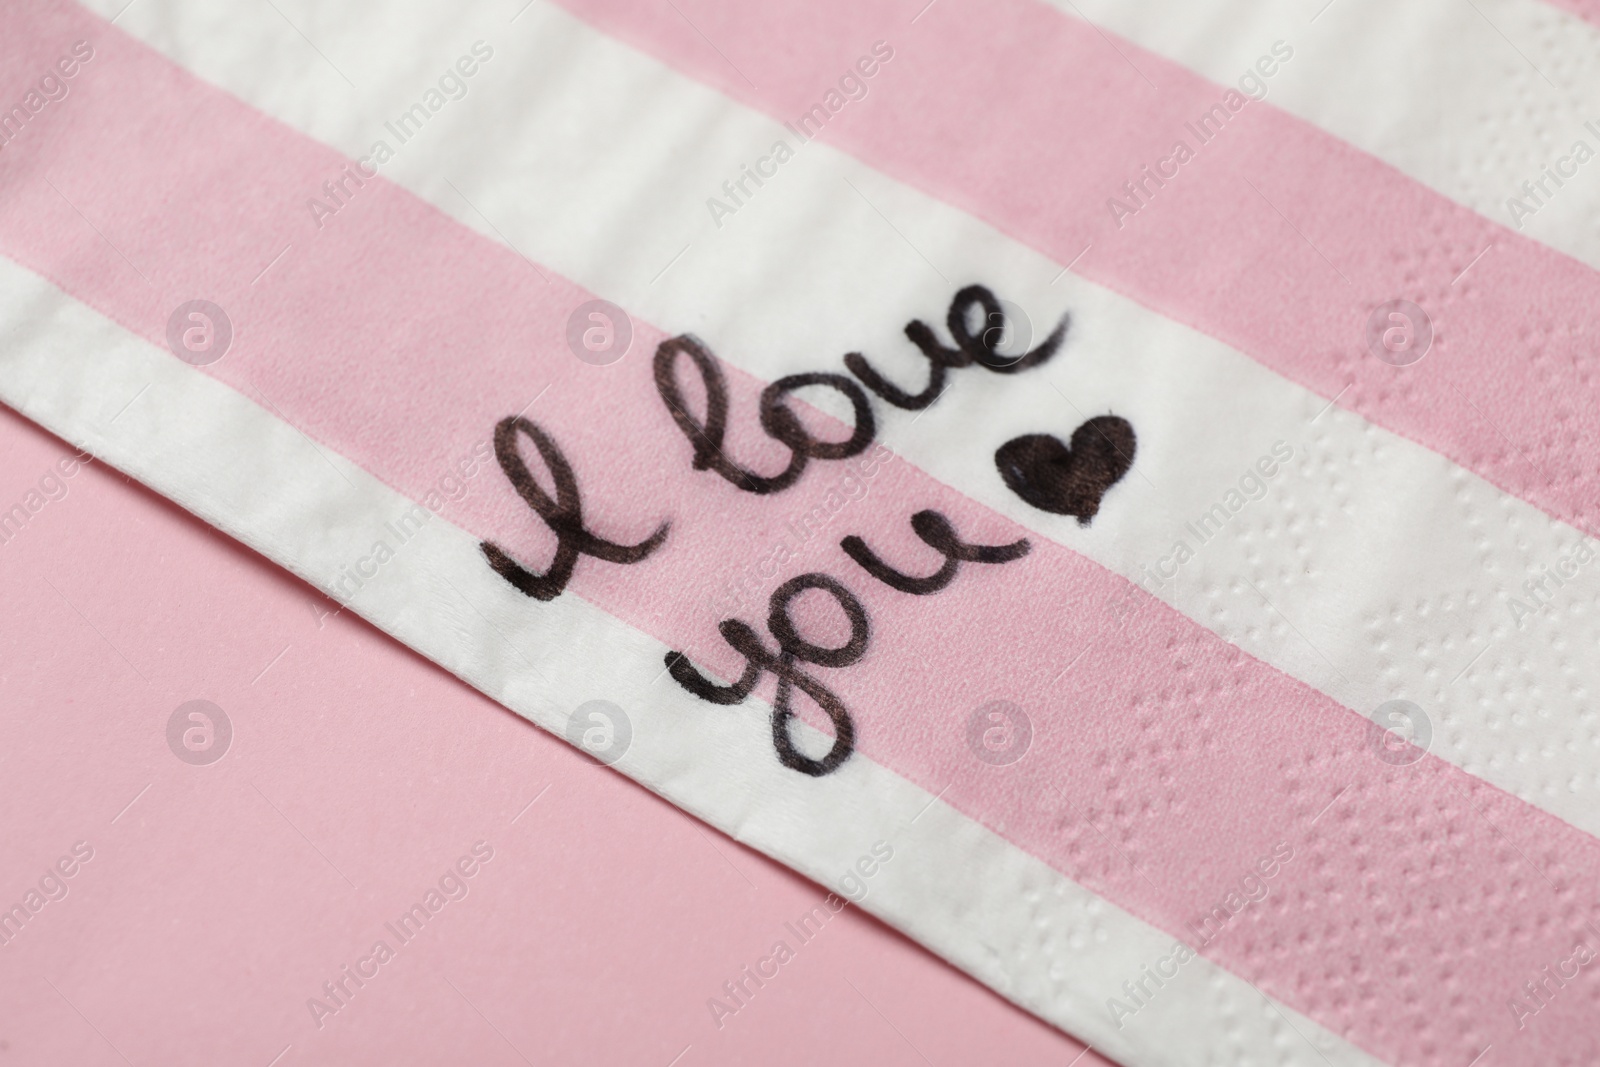 Photo of Napkin with handwritten message I Love You on pink table